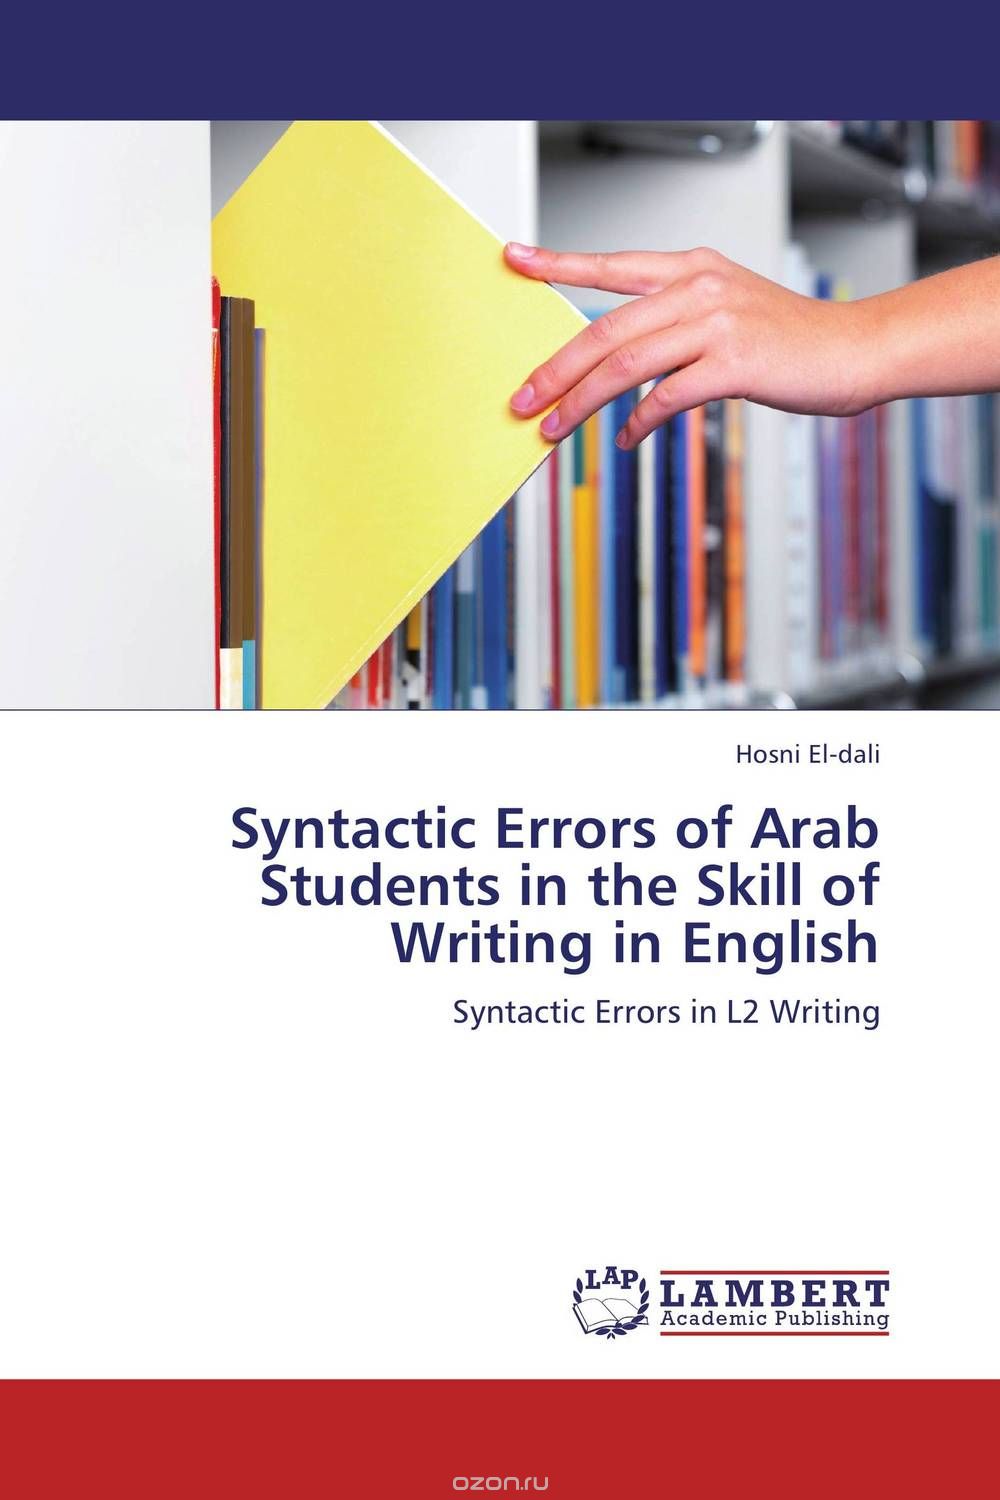 Скачать книгу "Syntactic Errors of Arab Students in the Skill of Writing in English"